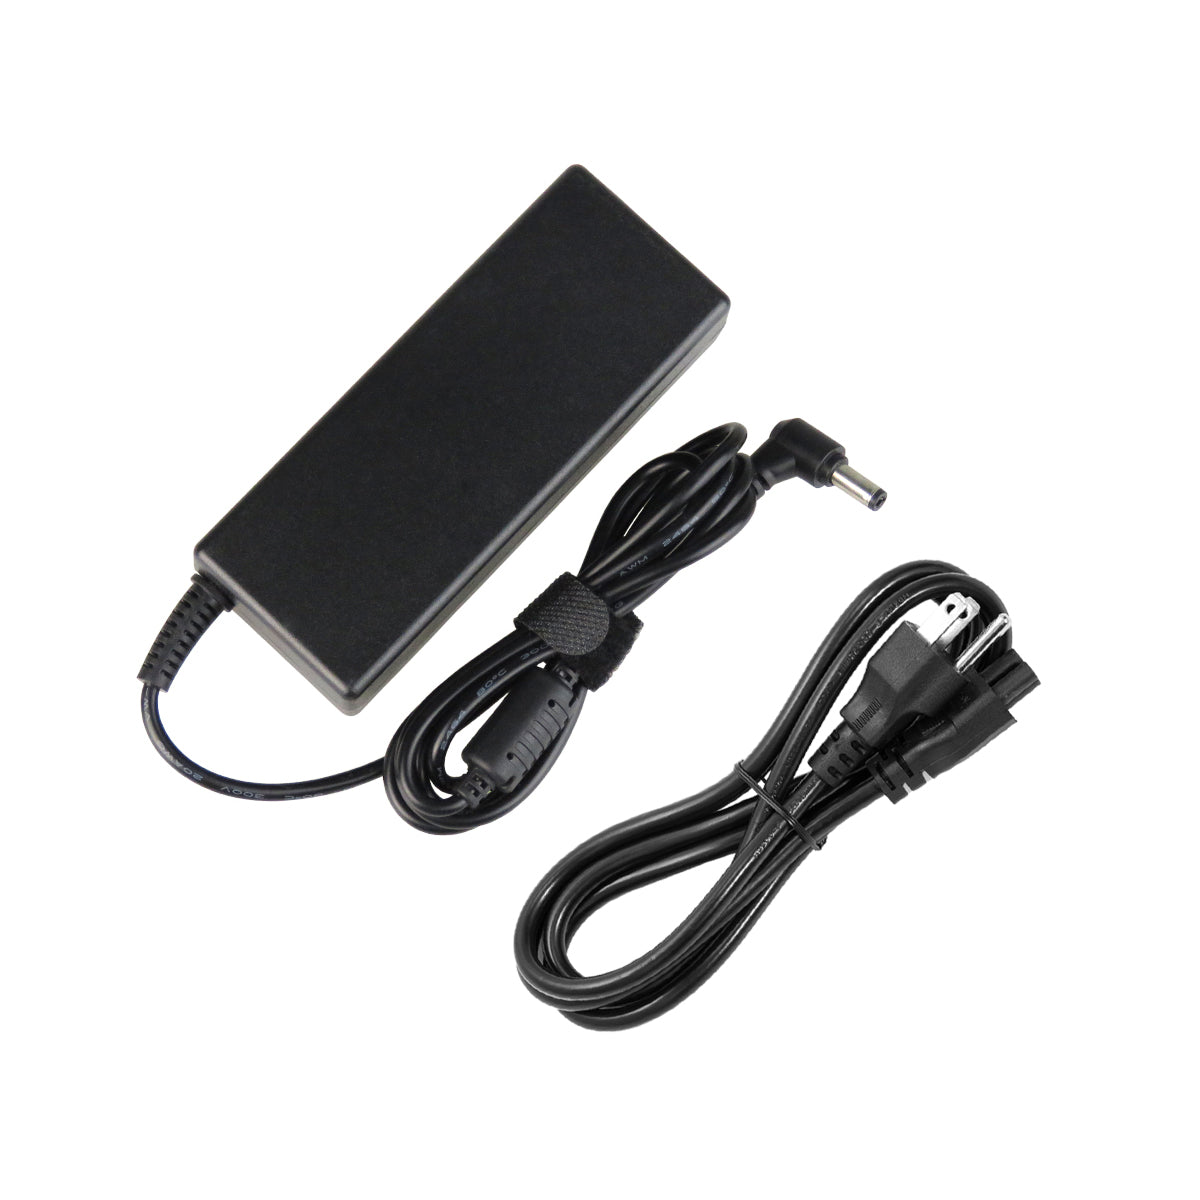 AC Adapter Charger for ASUS A8Tc Laptop.